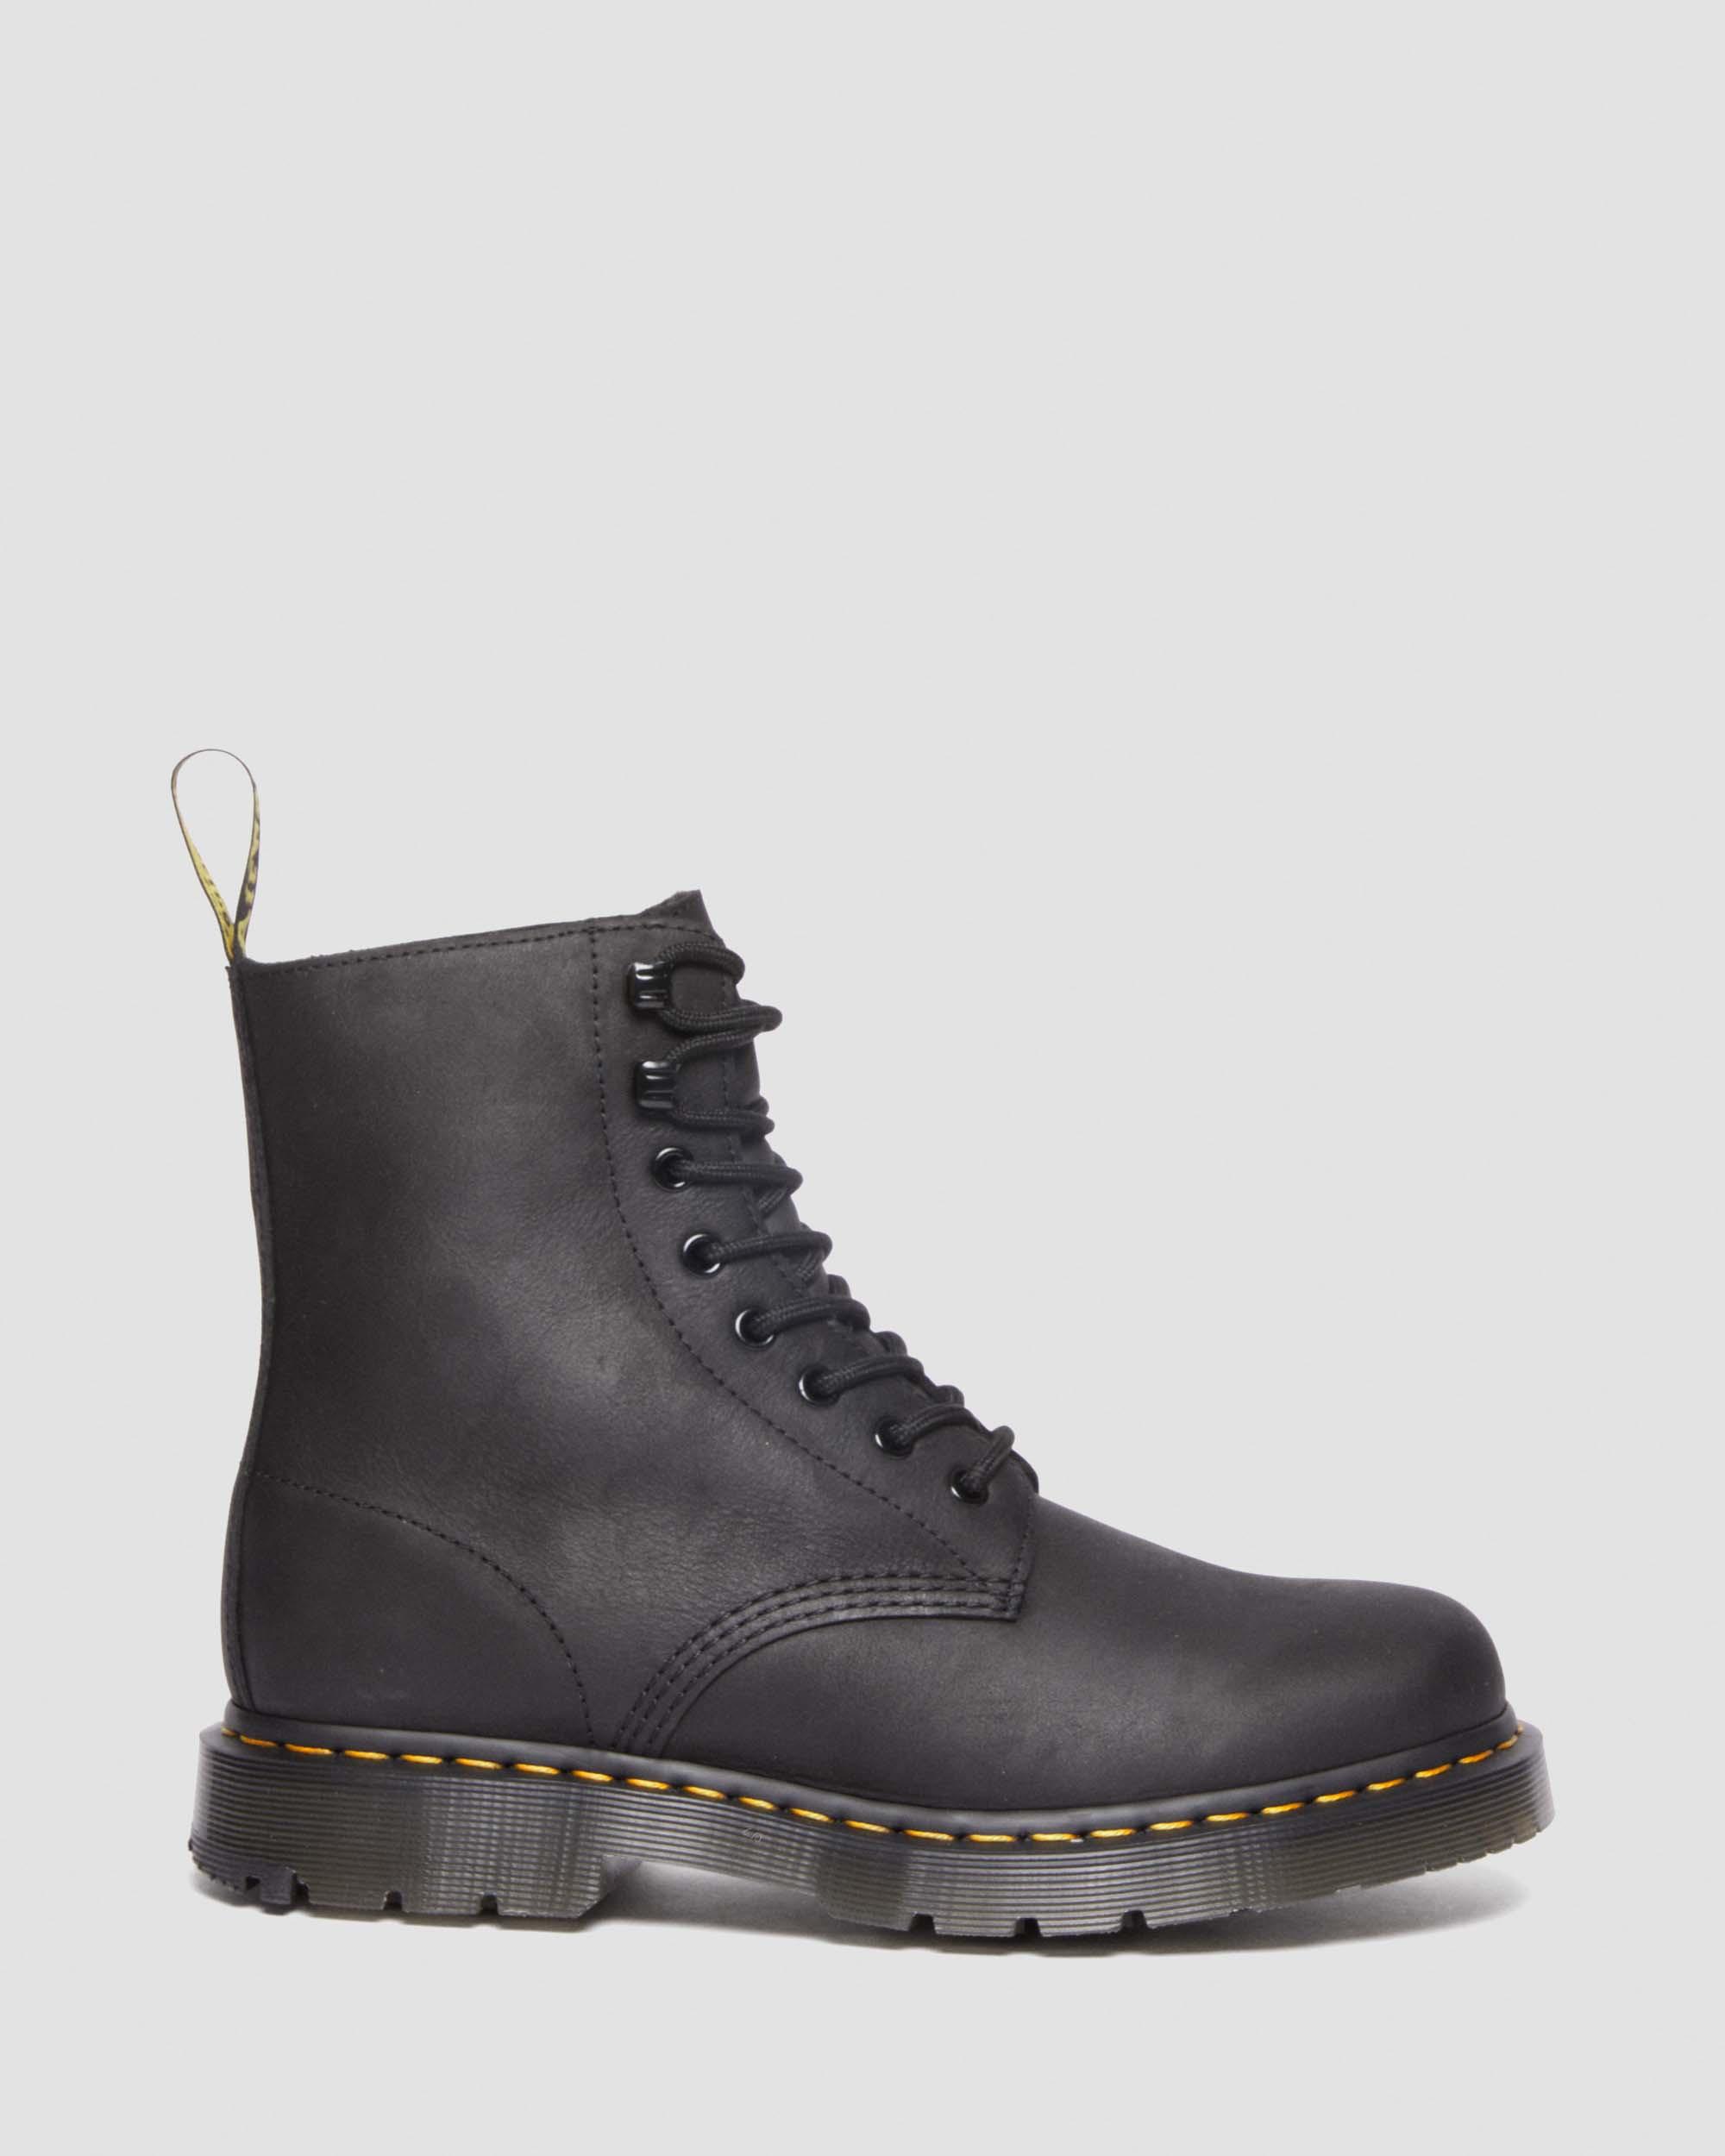 1460 Pascal Wintergrip Outlaw Leather Lace Up Boots1460 Pascal Fleece Lined Leather Boots Dr. Martens